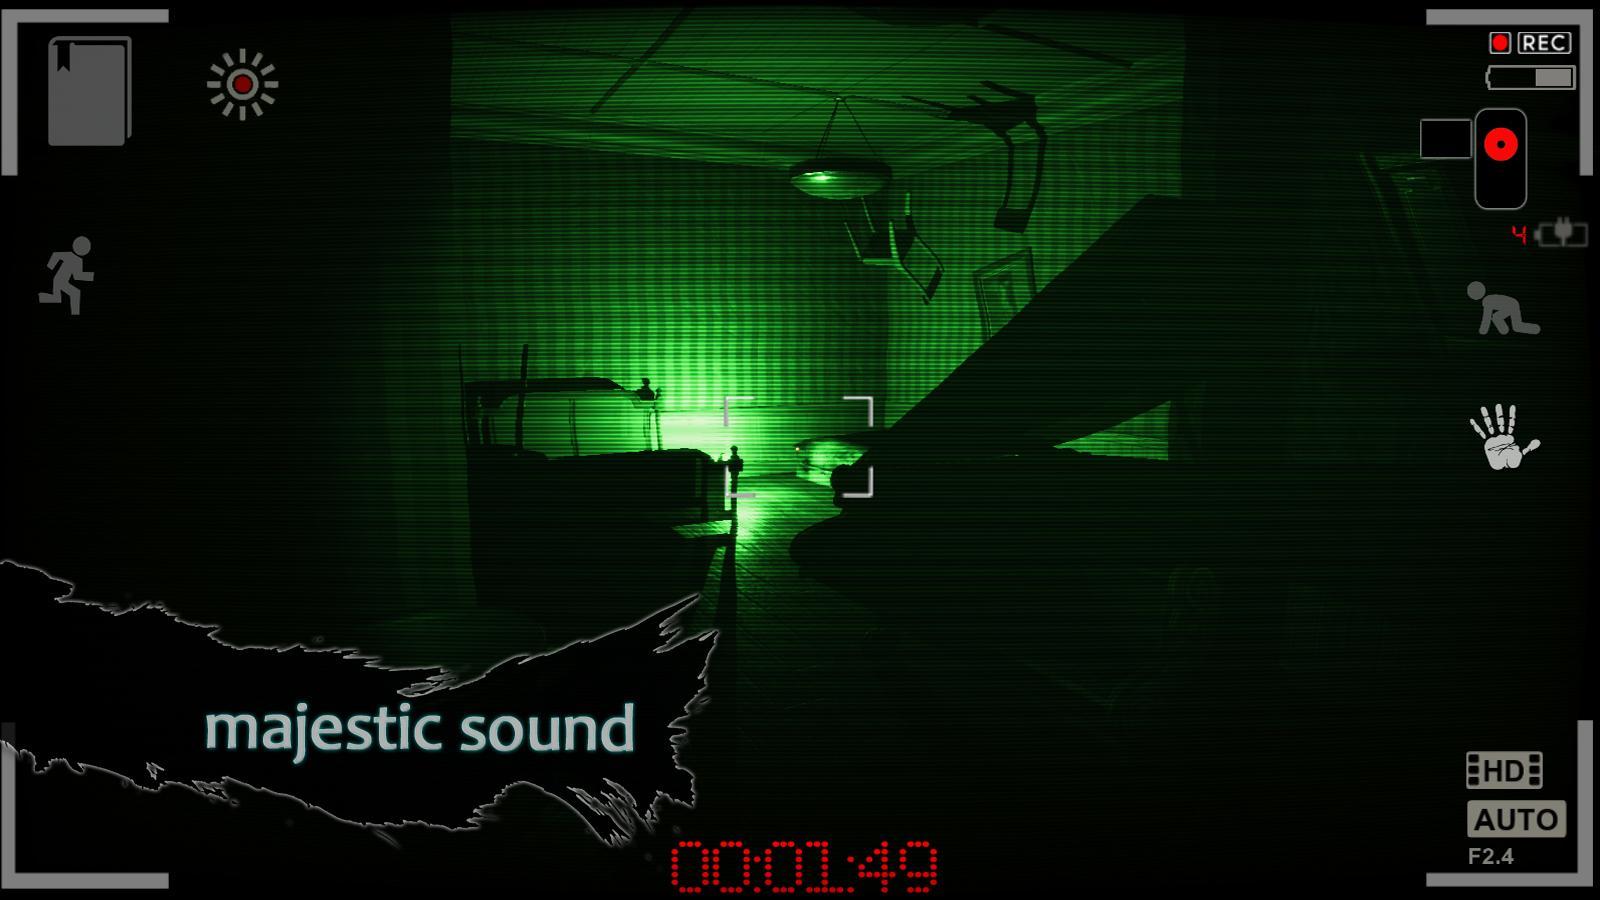 Screenshot of Reporter 2 - Scary Horror Game